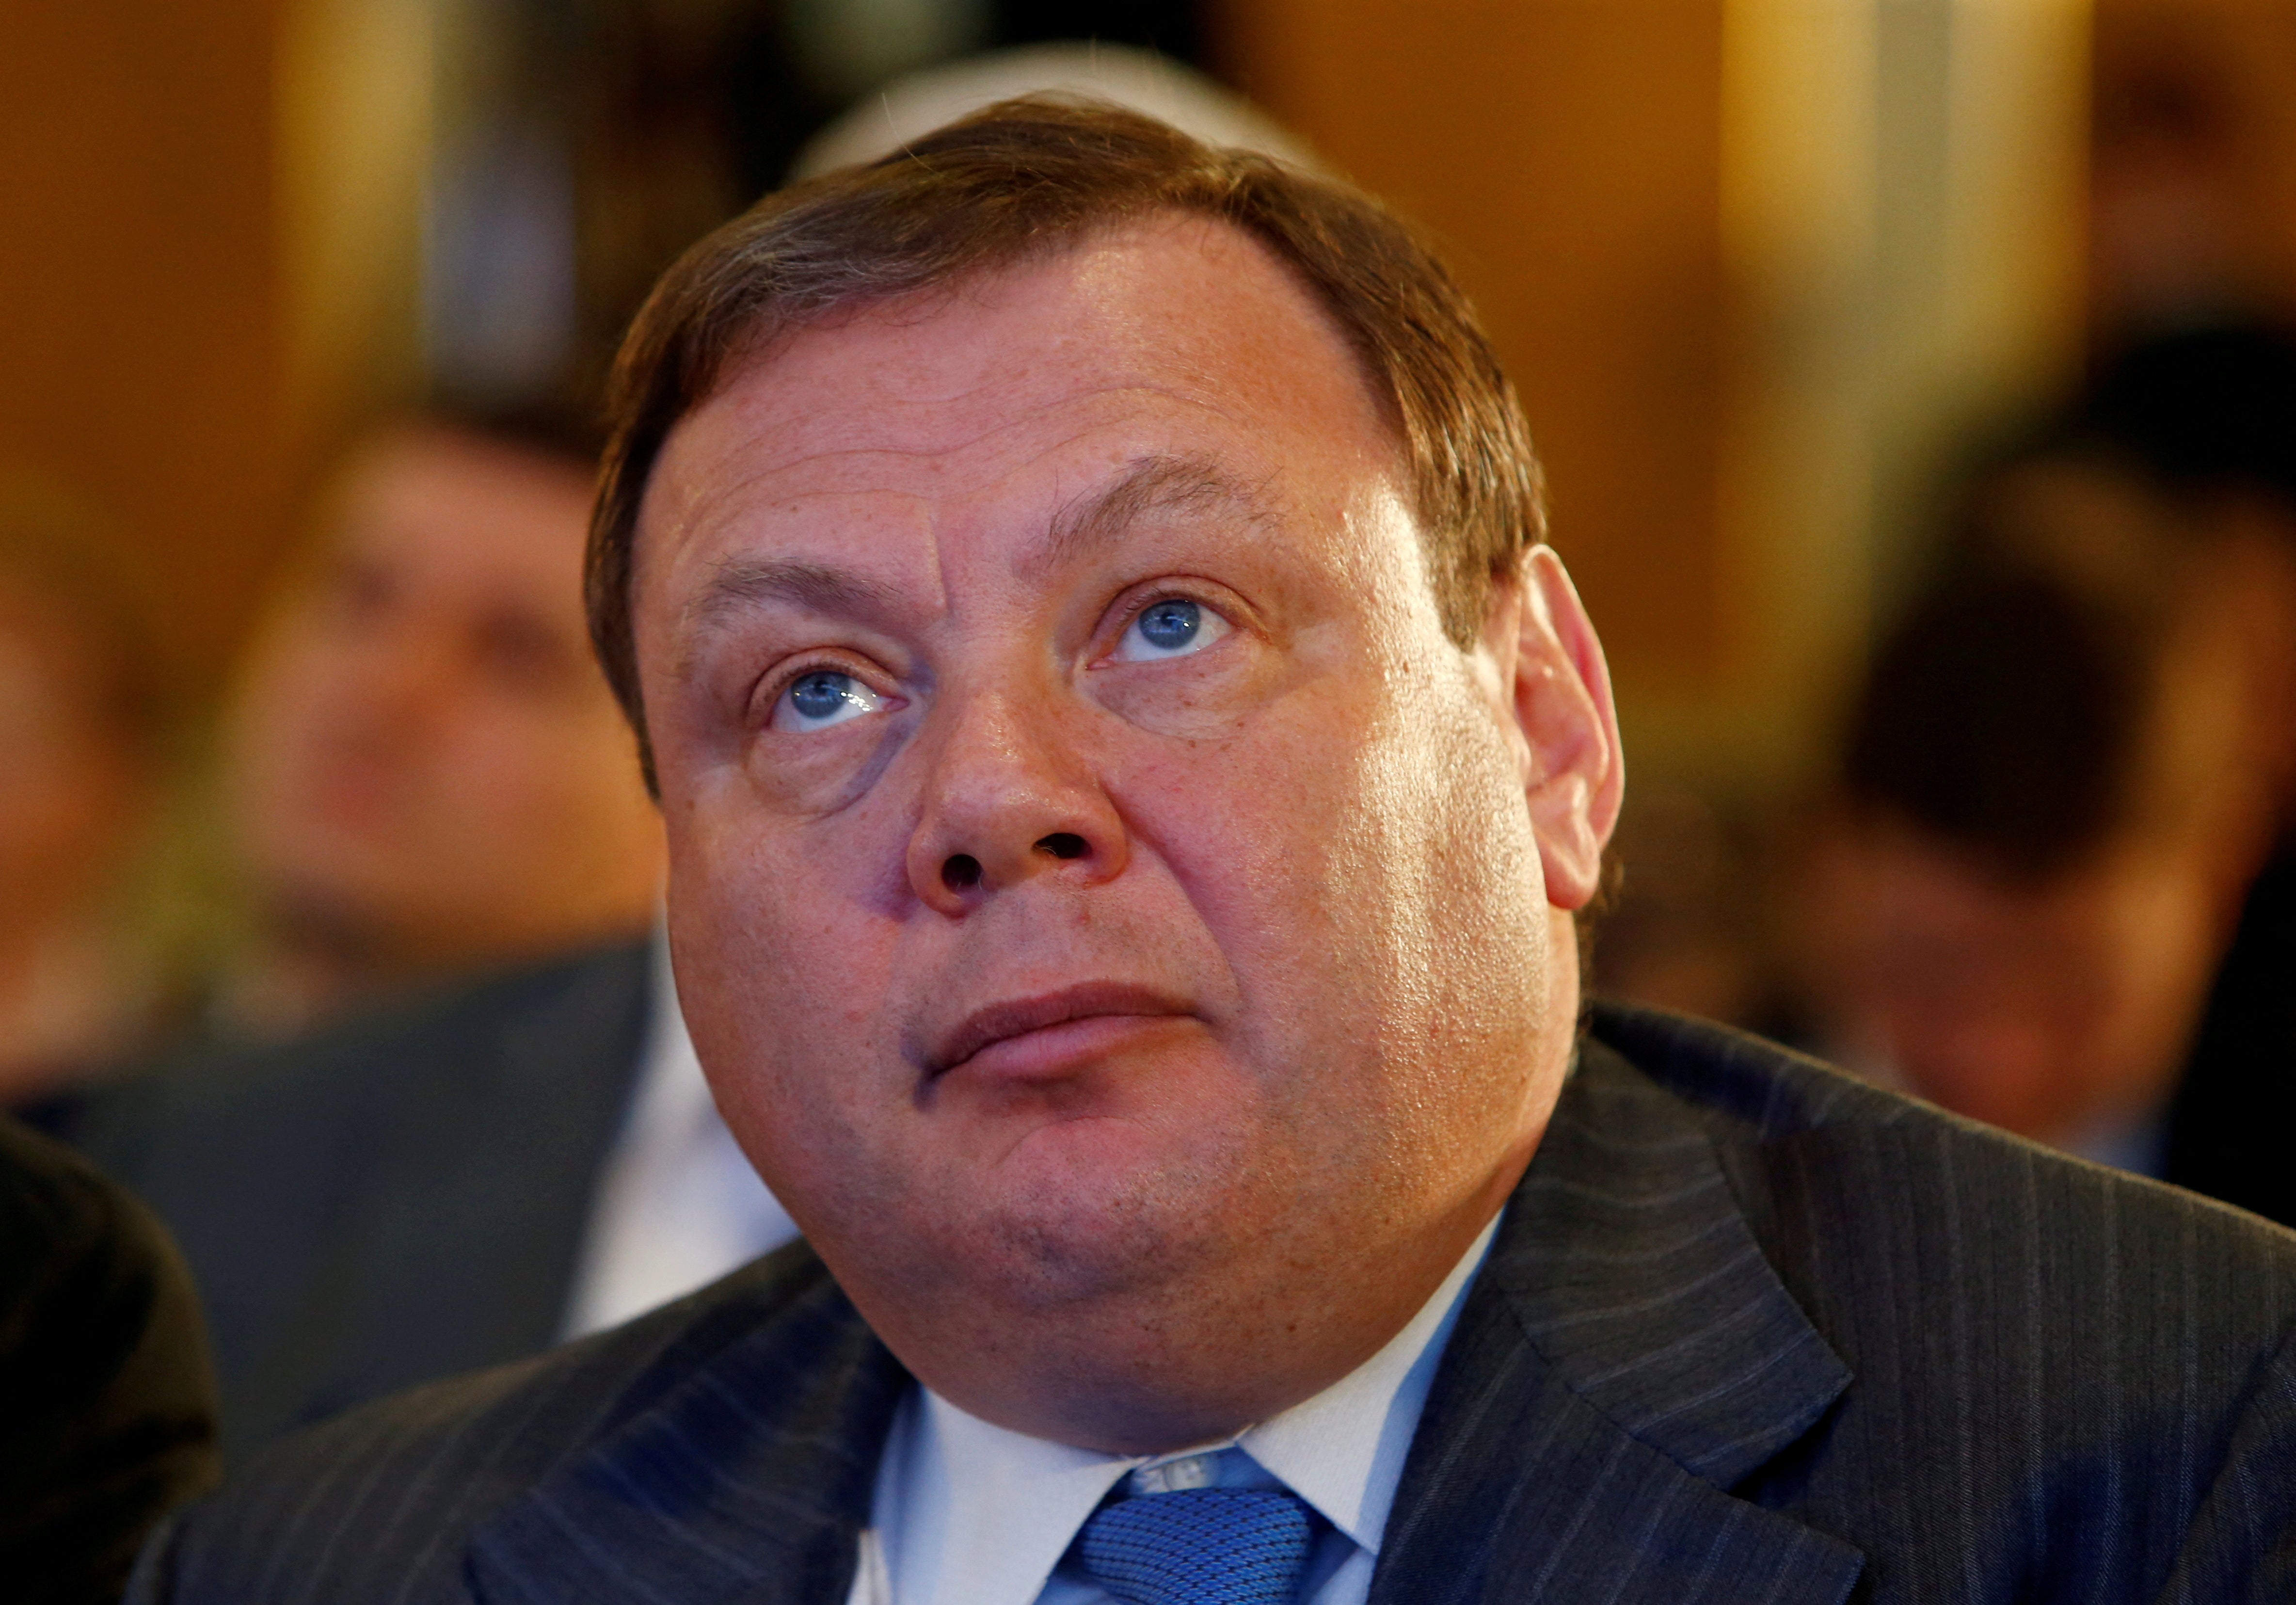 Mikhail Fridman purchased Athlone House in 2016 and it houses a £44 million art collection